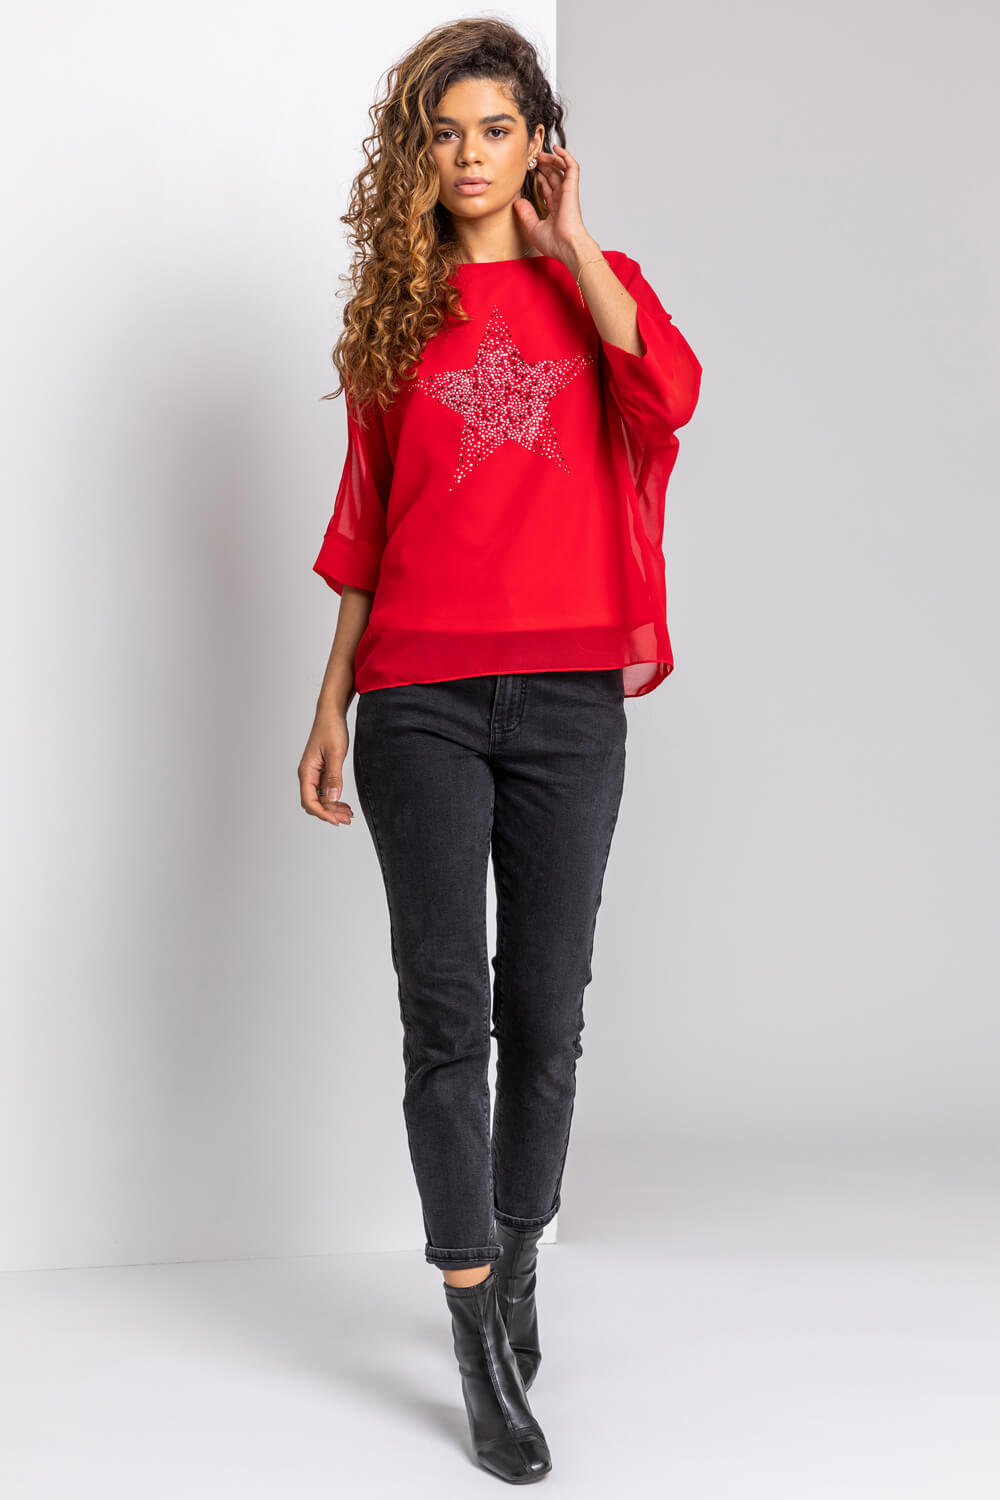 Red Star Embellished Chiffon Top, Image 4 of 5